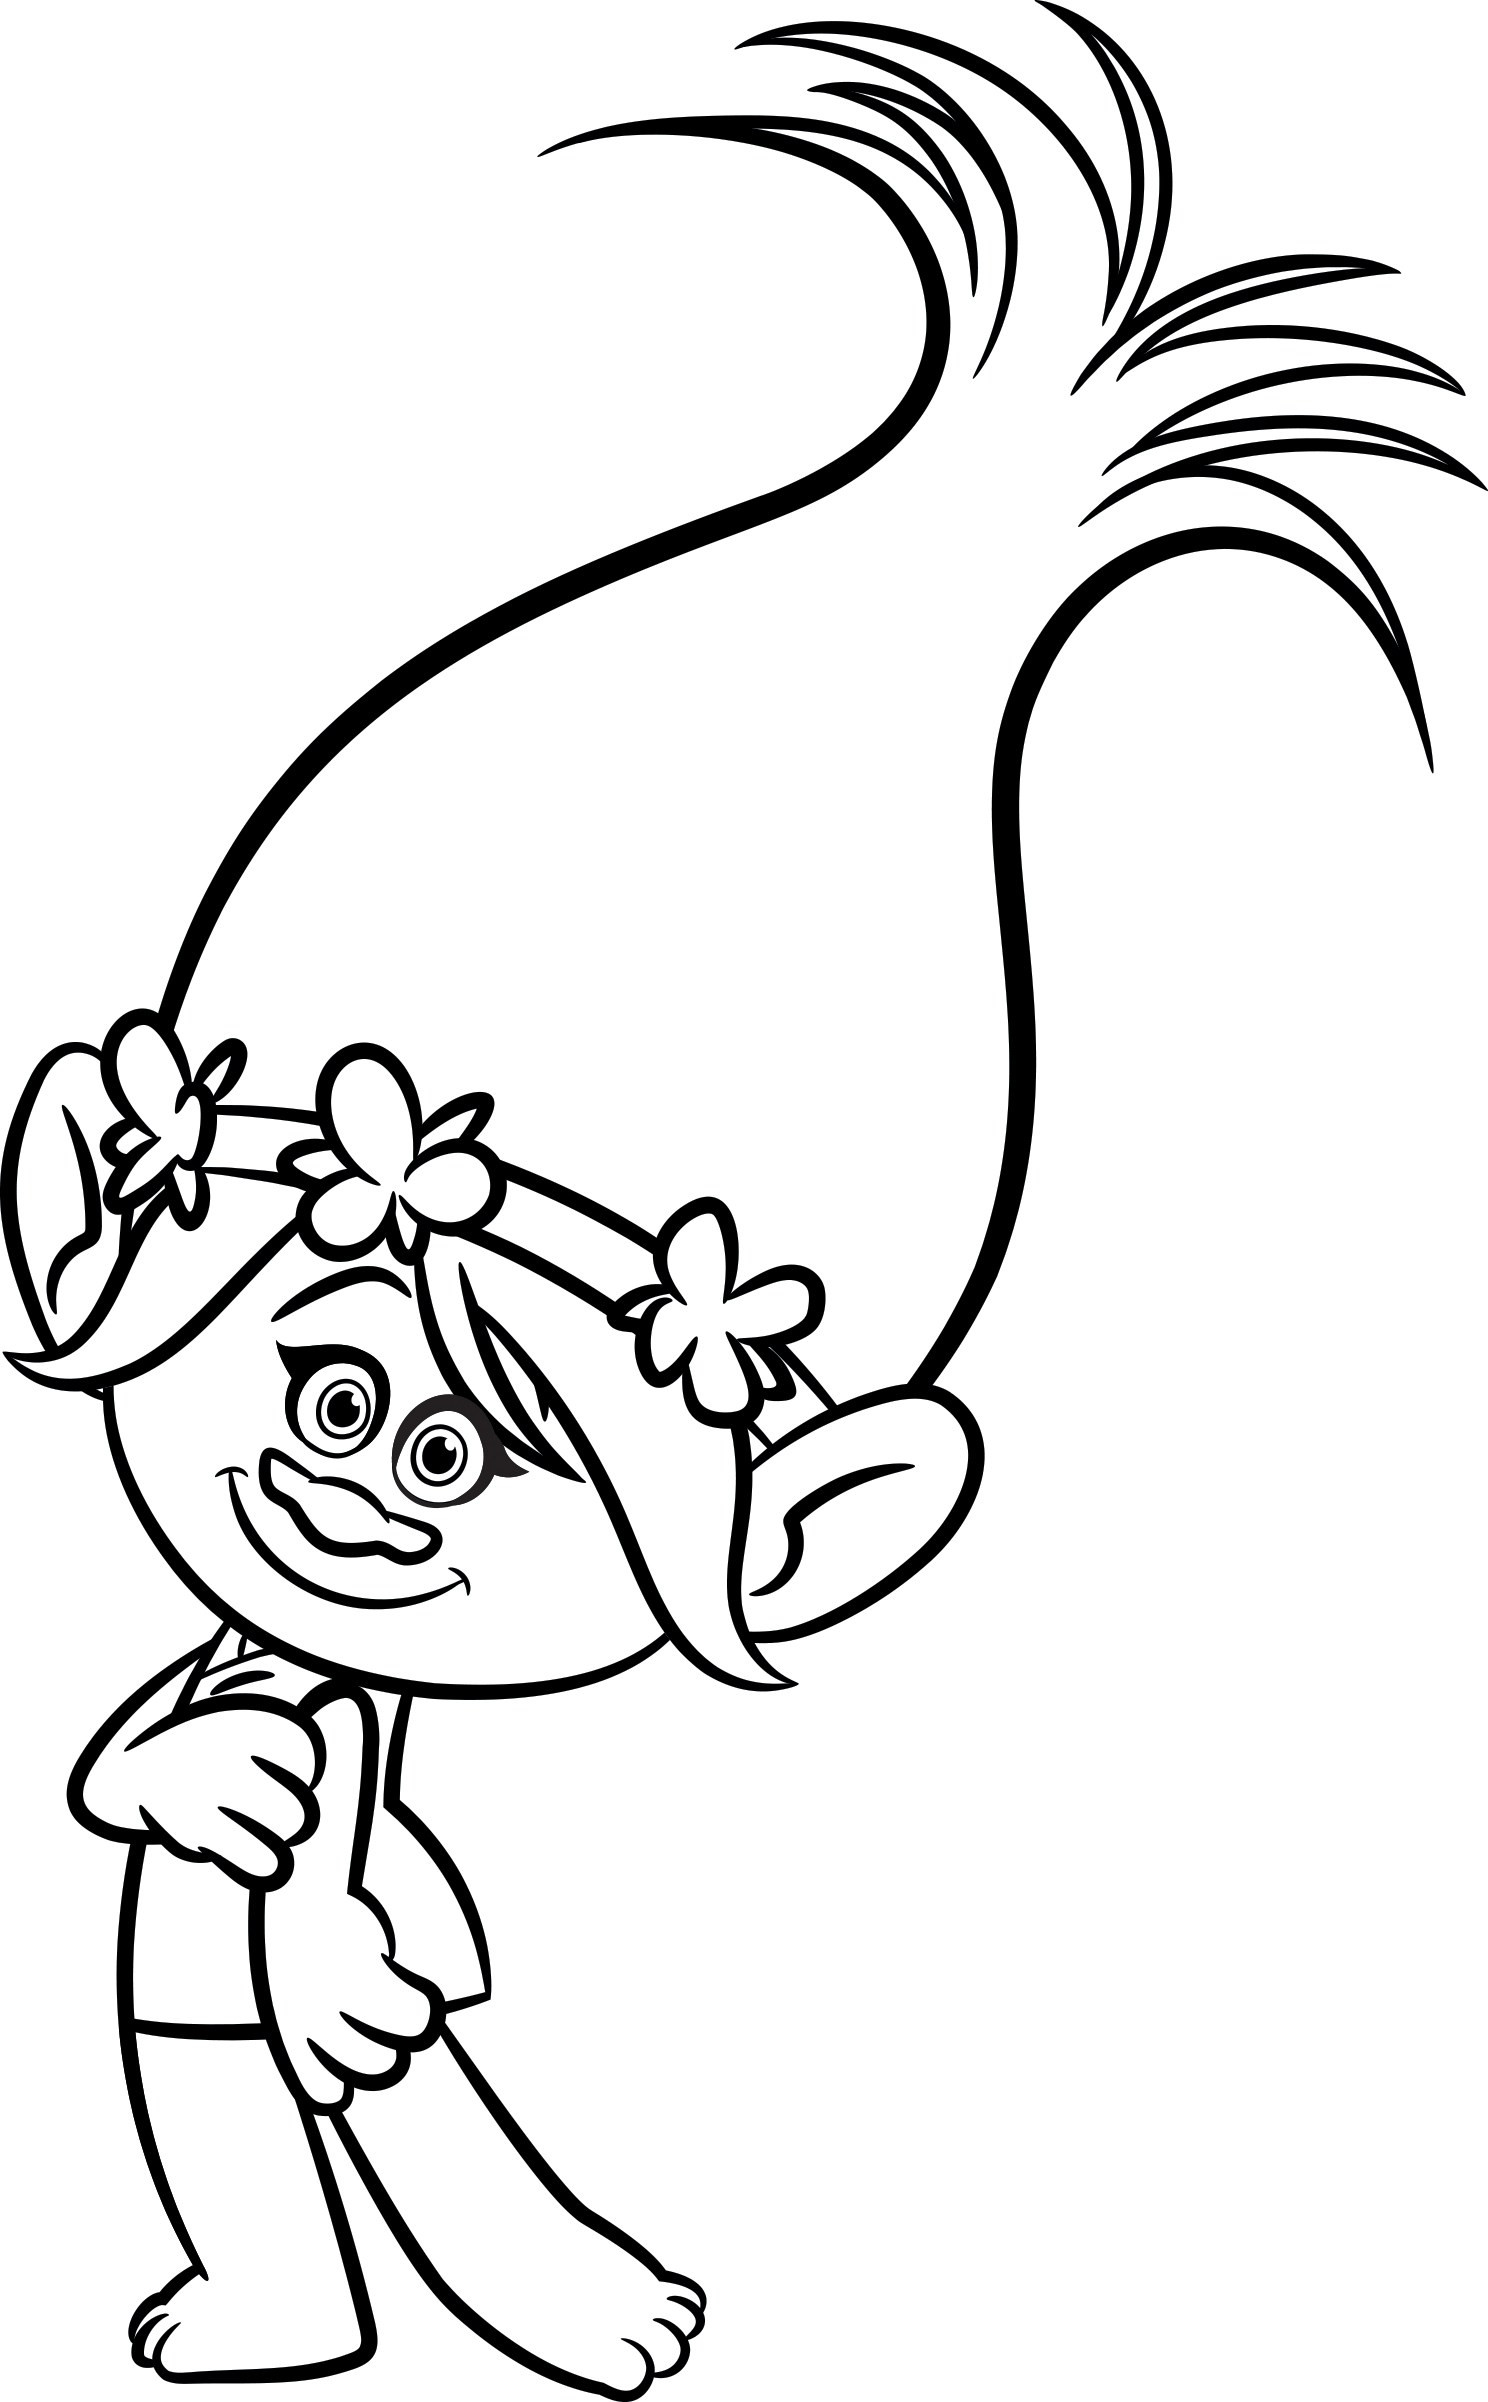 Poppy Trolls Coloring Pages
 Trolls Movie Coloring Pages Best Coloring Pages For Kids